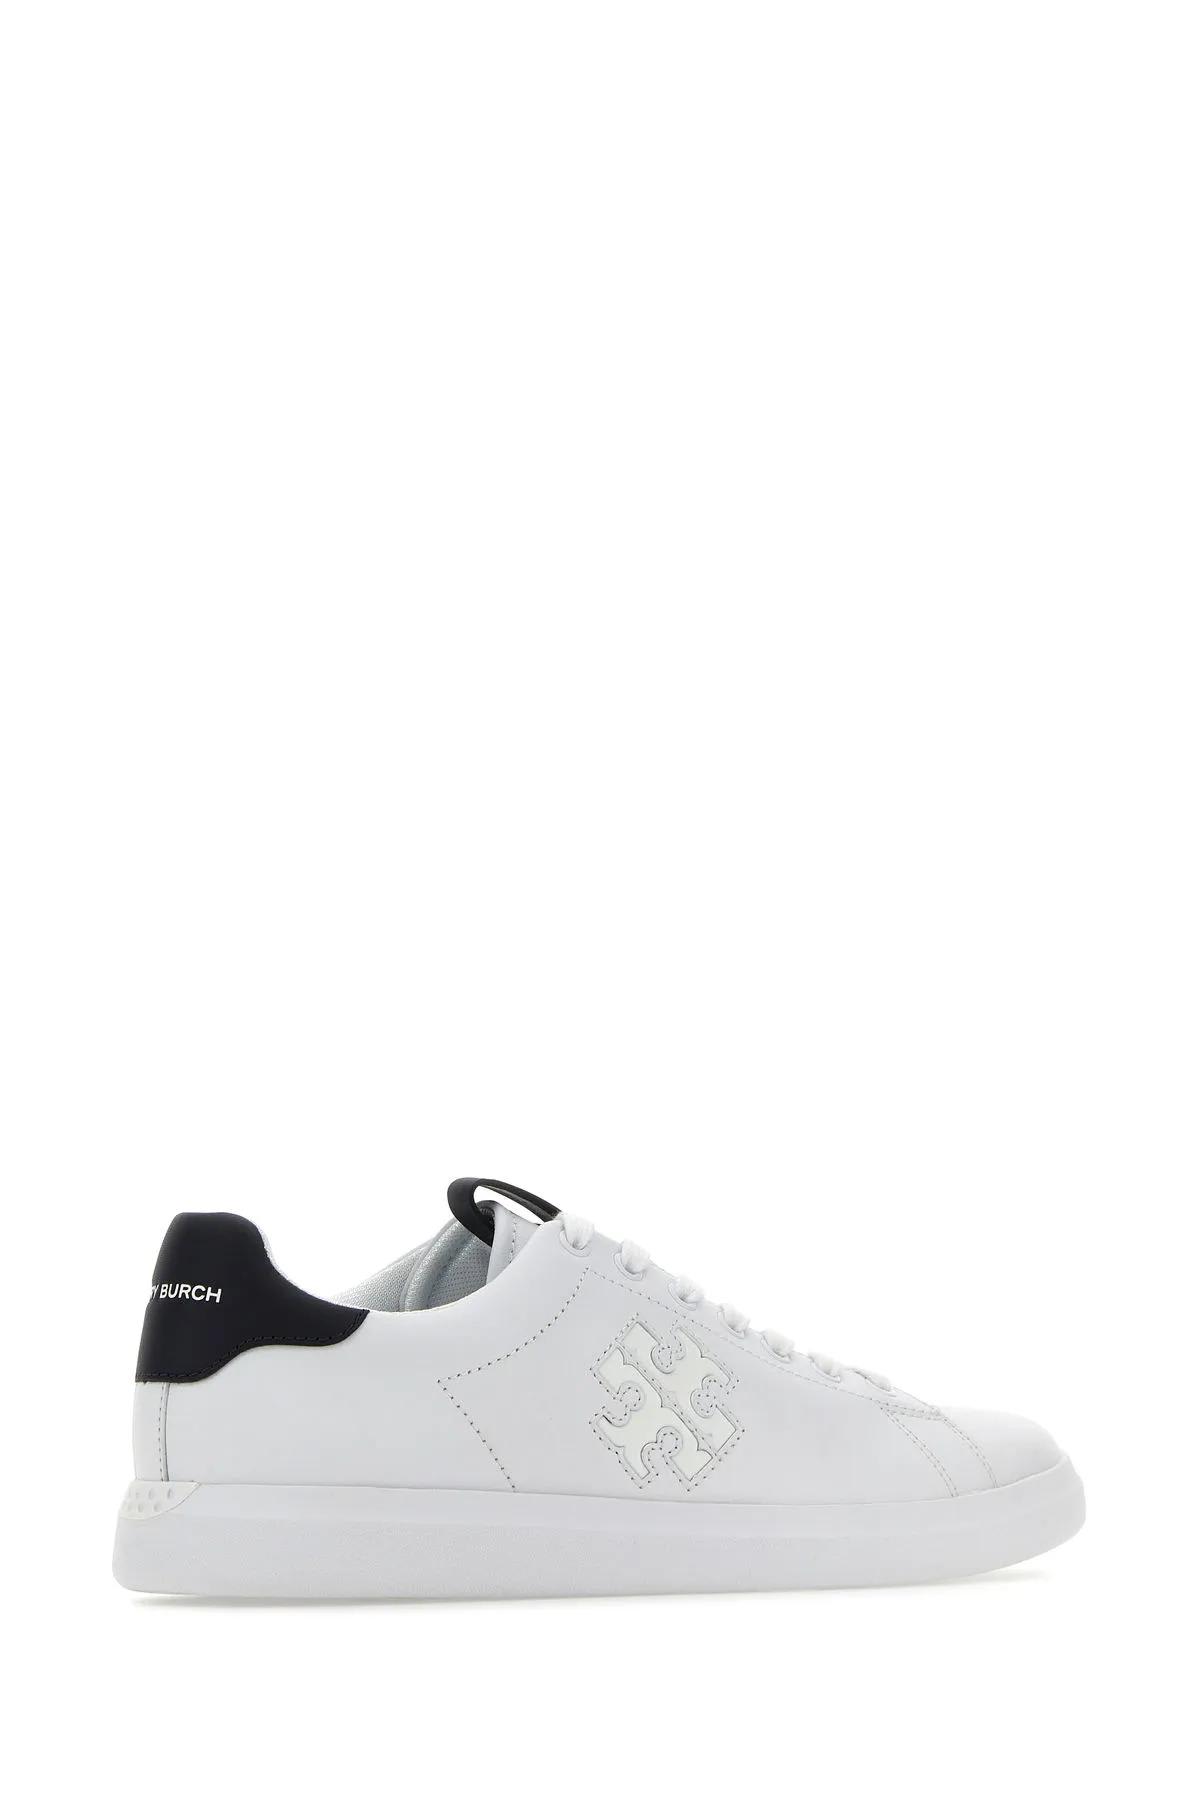 Shop Tory Burch Chalk Leather Howell Court Sneakers